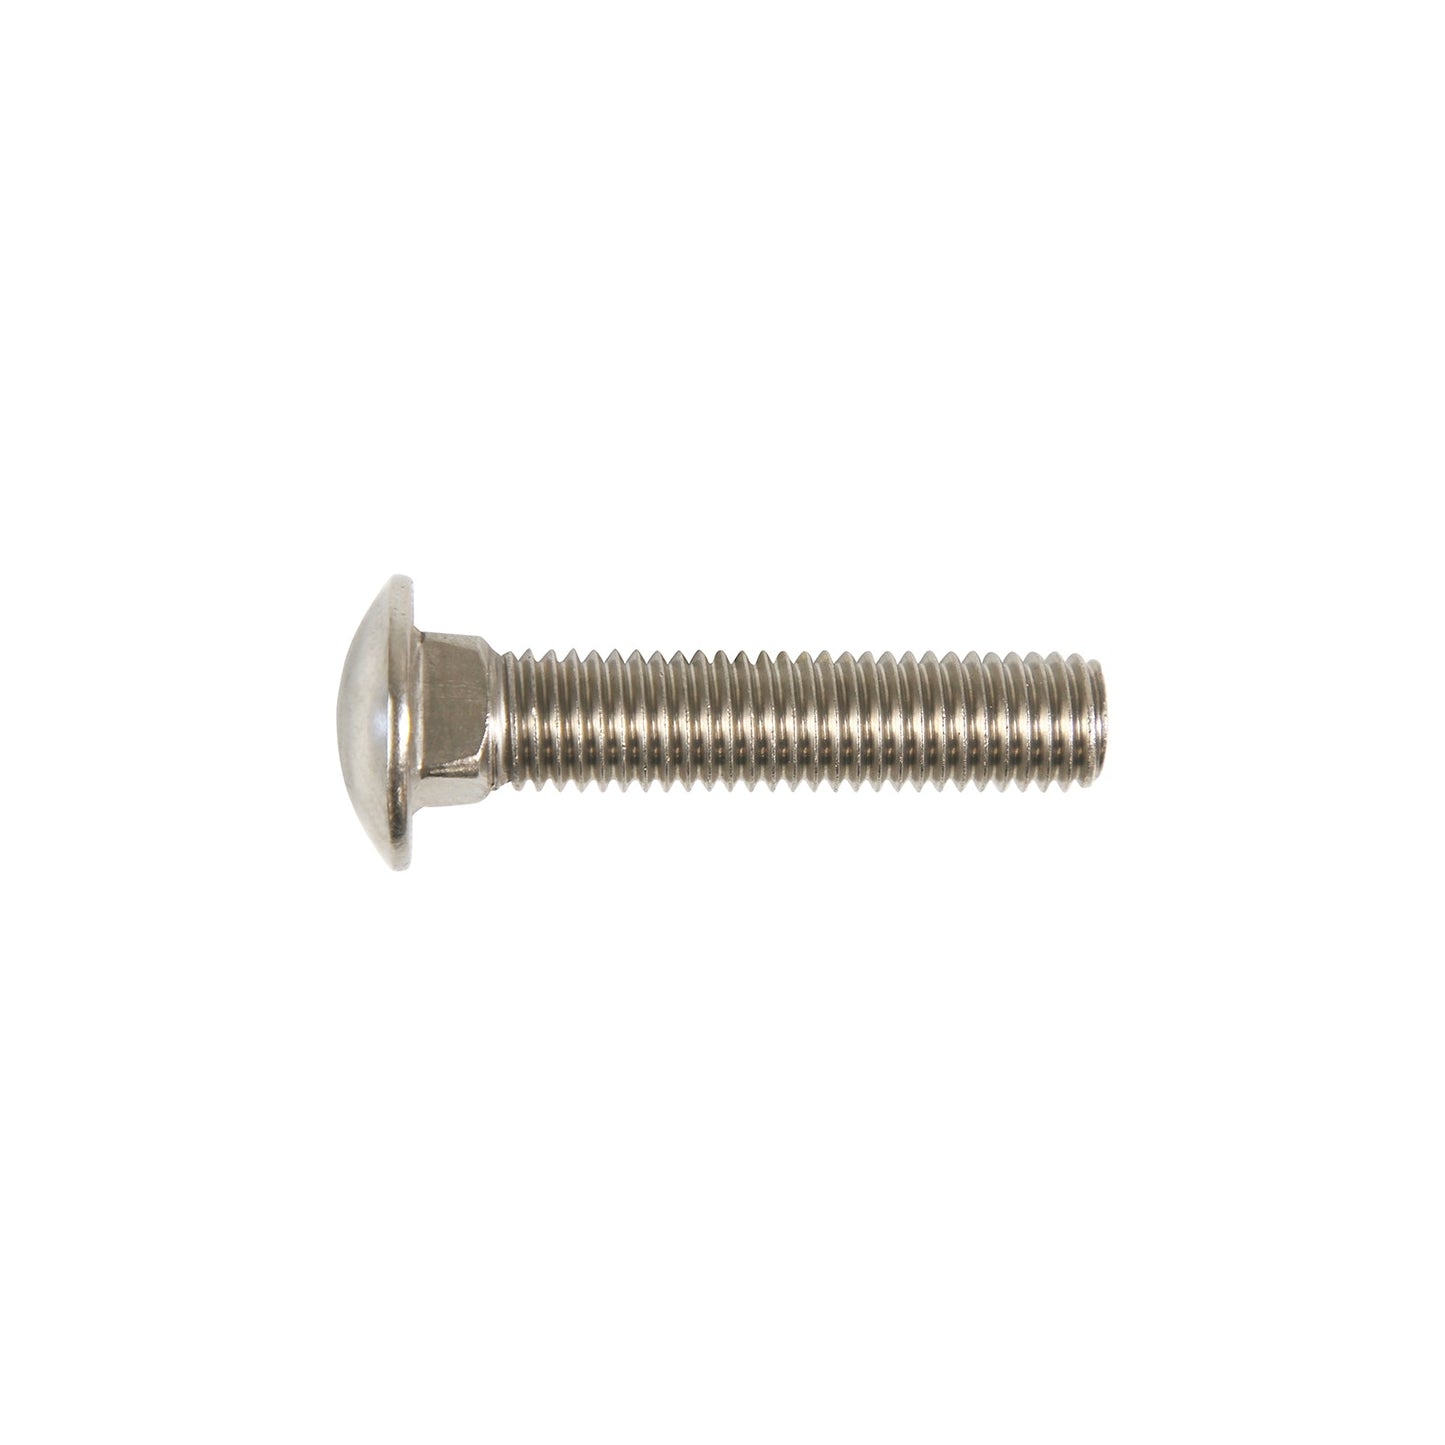 5/8"-11 x 3" Conquest Carriage Bolt - 304 Stainless Steel